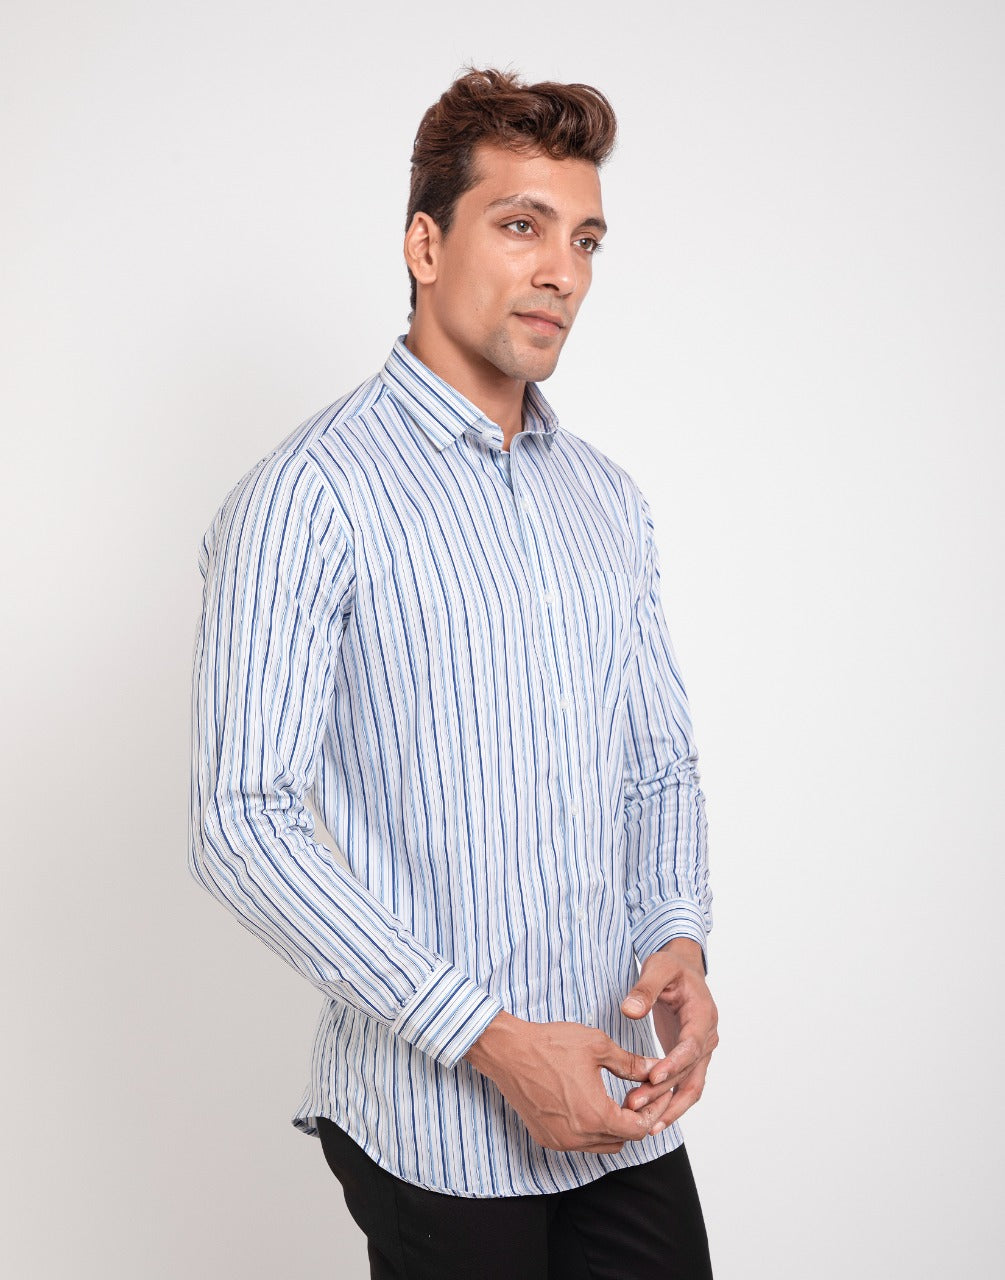 White & blue stripes lining casual wear shirt